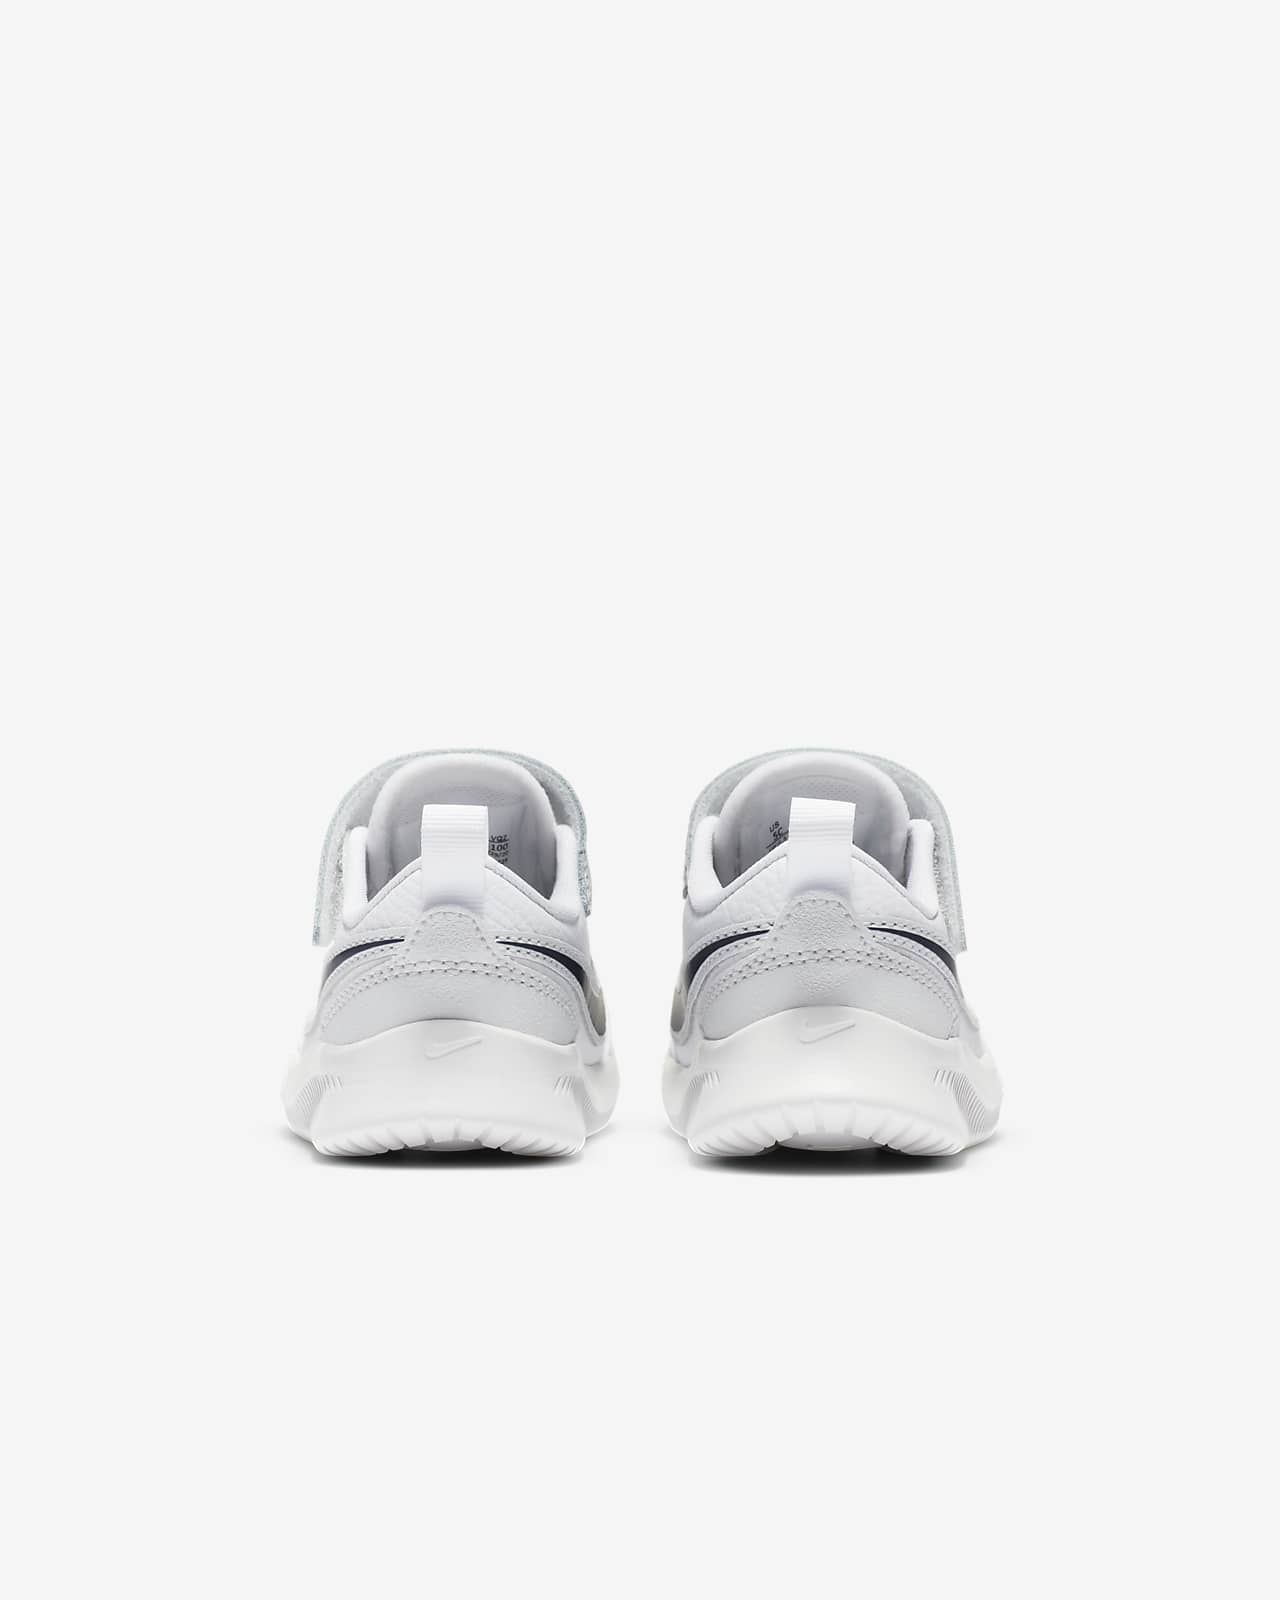 nike toddler leather shoes